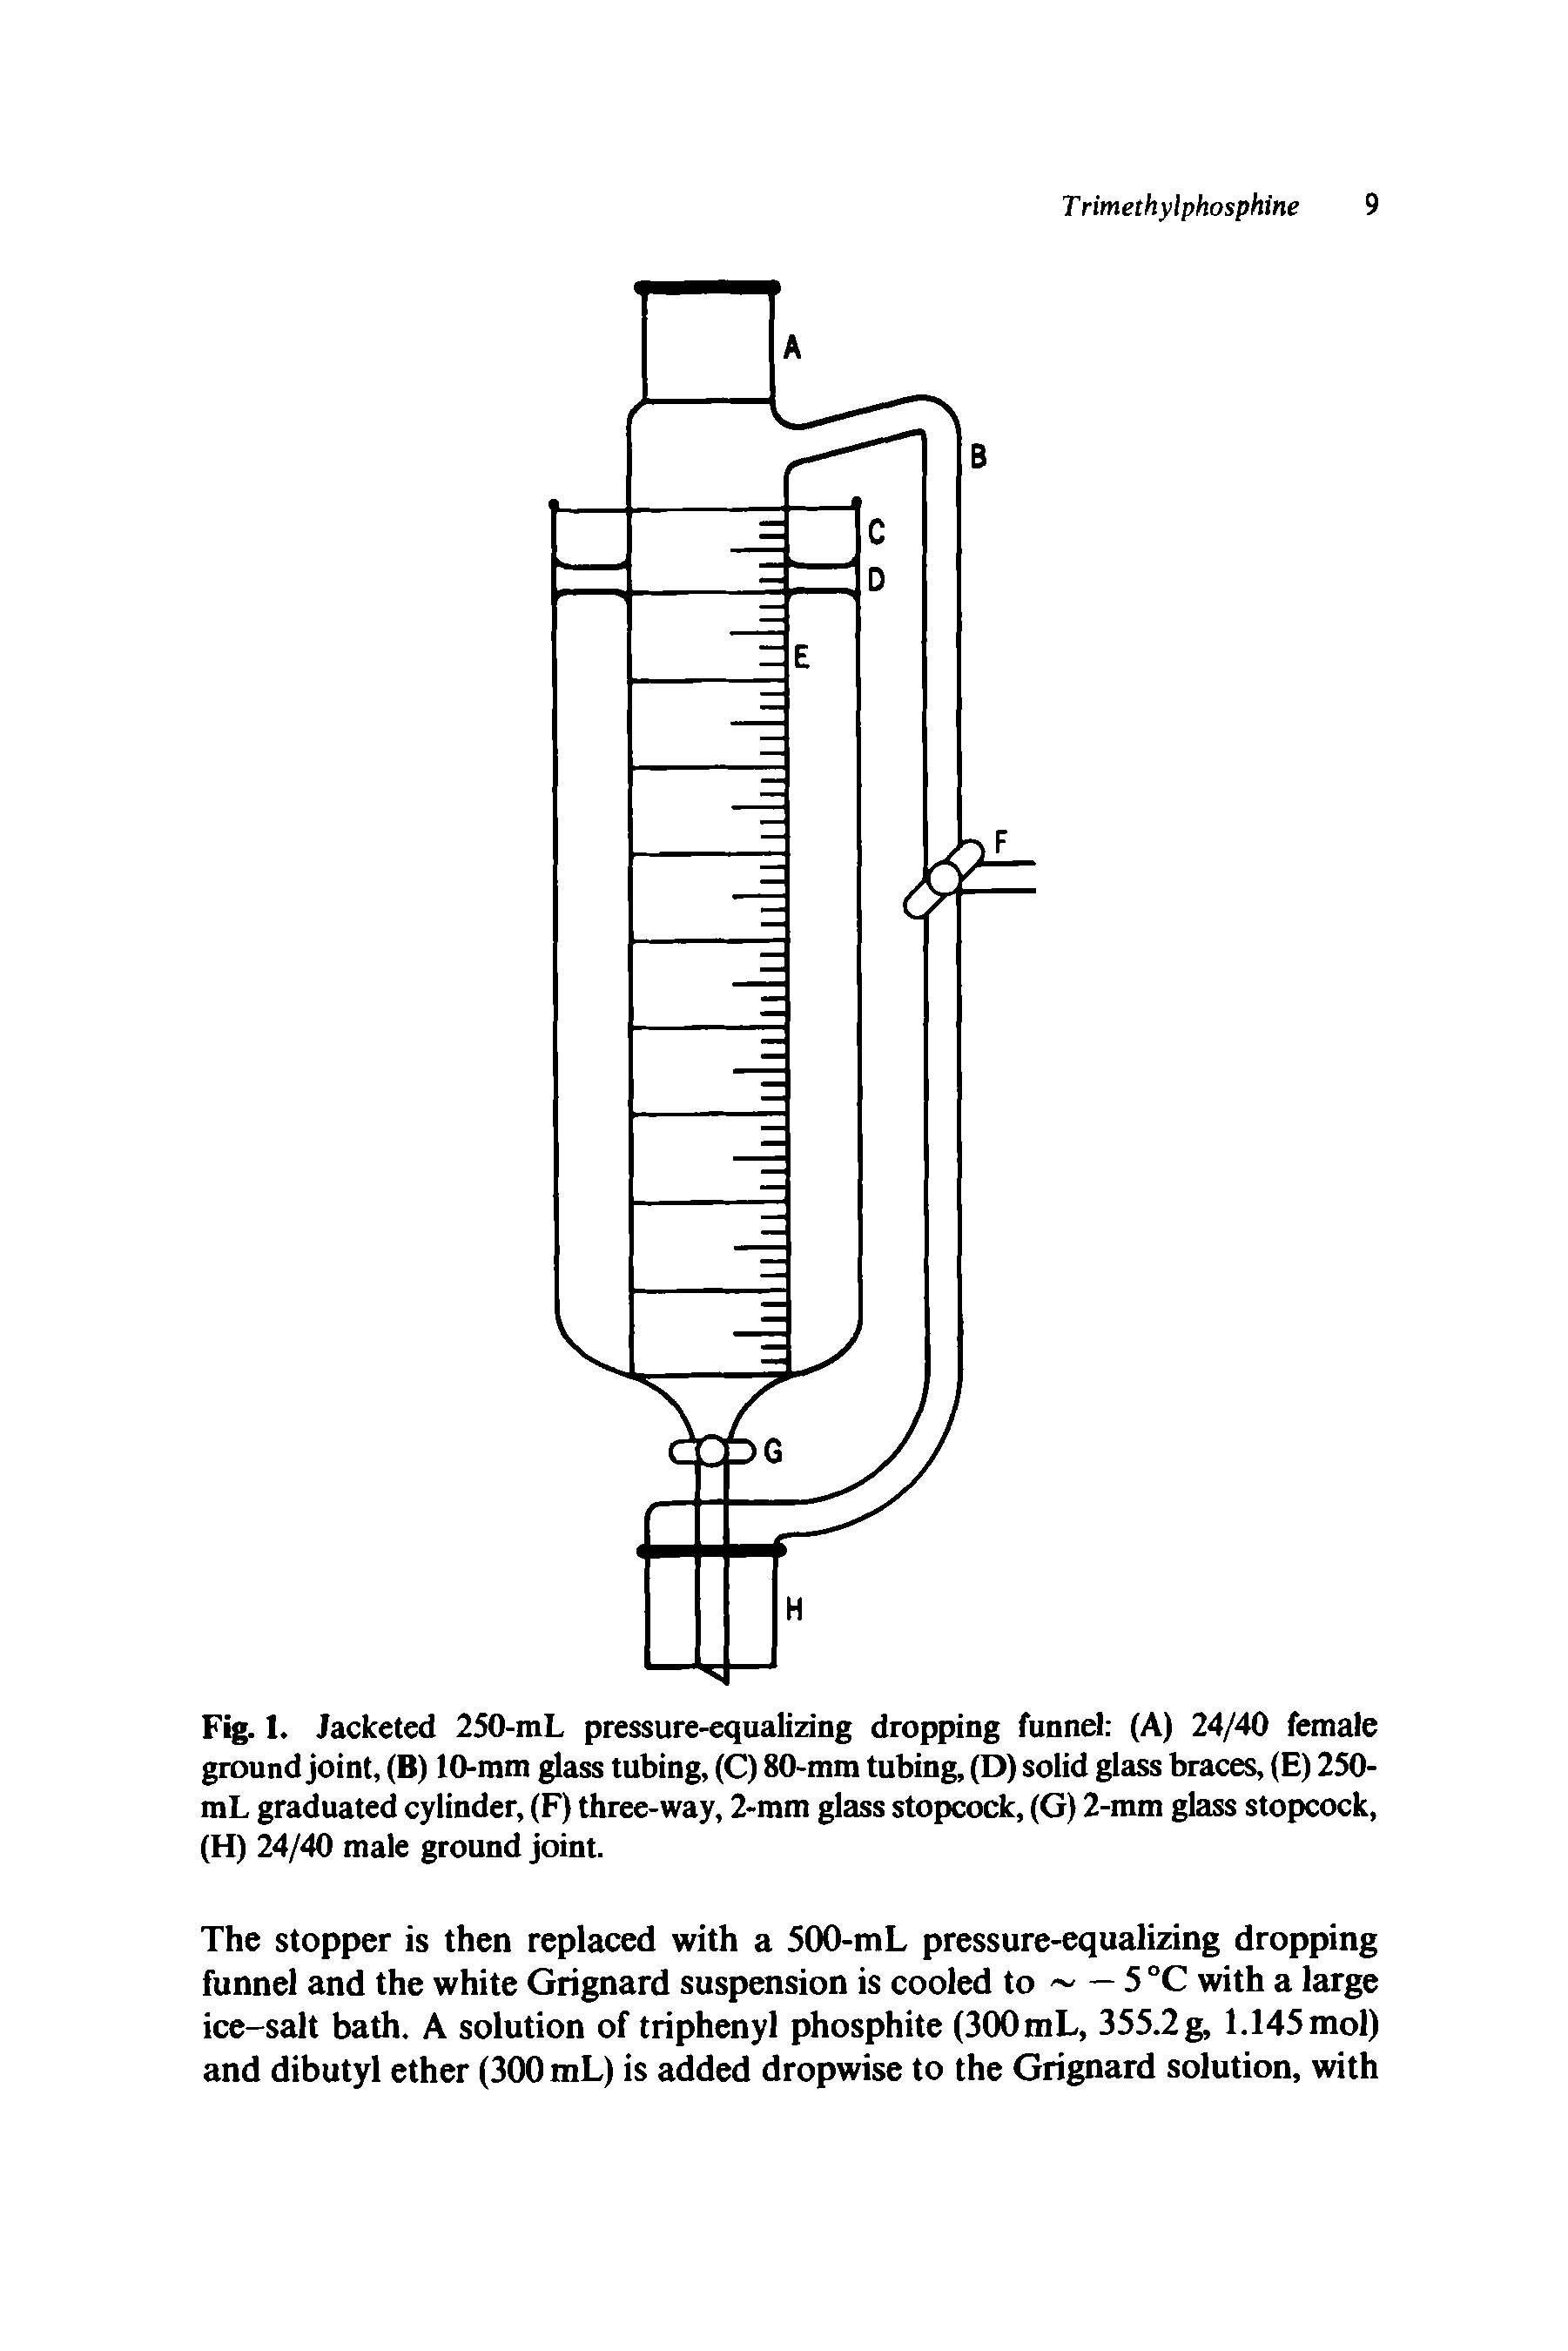 Fig. 1. Jacketed 250-mL pressure-equalizing dropping funnel (A) 24/40 female ground joint, (B) 10-mm glass tubing, (C) 80-mm tubing, (D) solid glass braces, (E) 250-mL graduated cylinder, (F) three-way, 2-mm glass stopcock, (G) 2-mm glass stopcock, (H) 24/40 male ground joint.